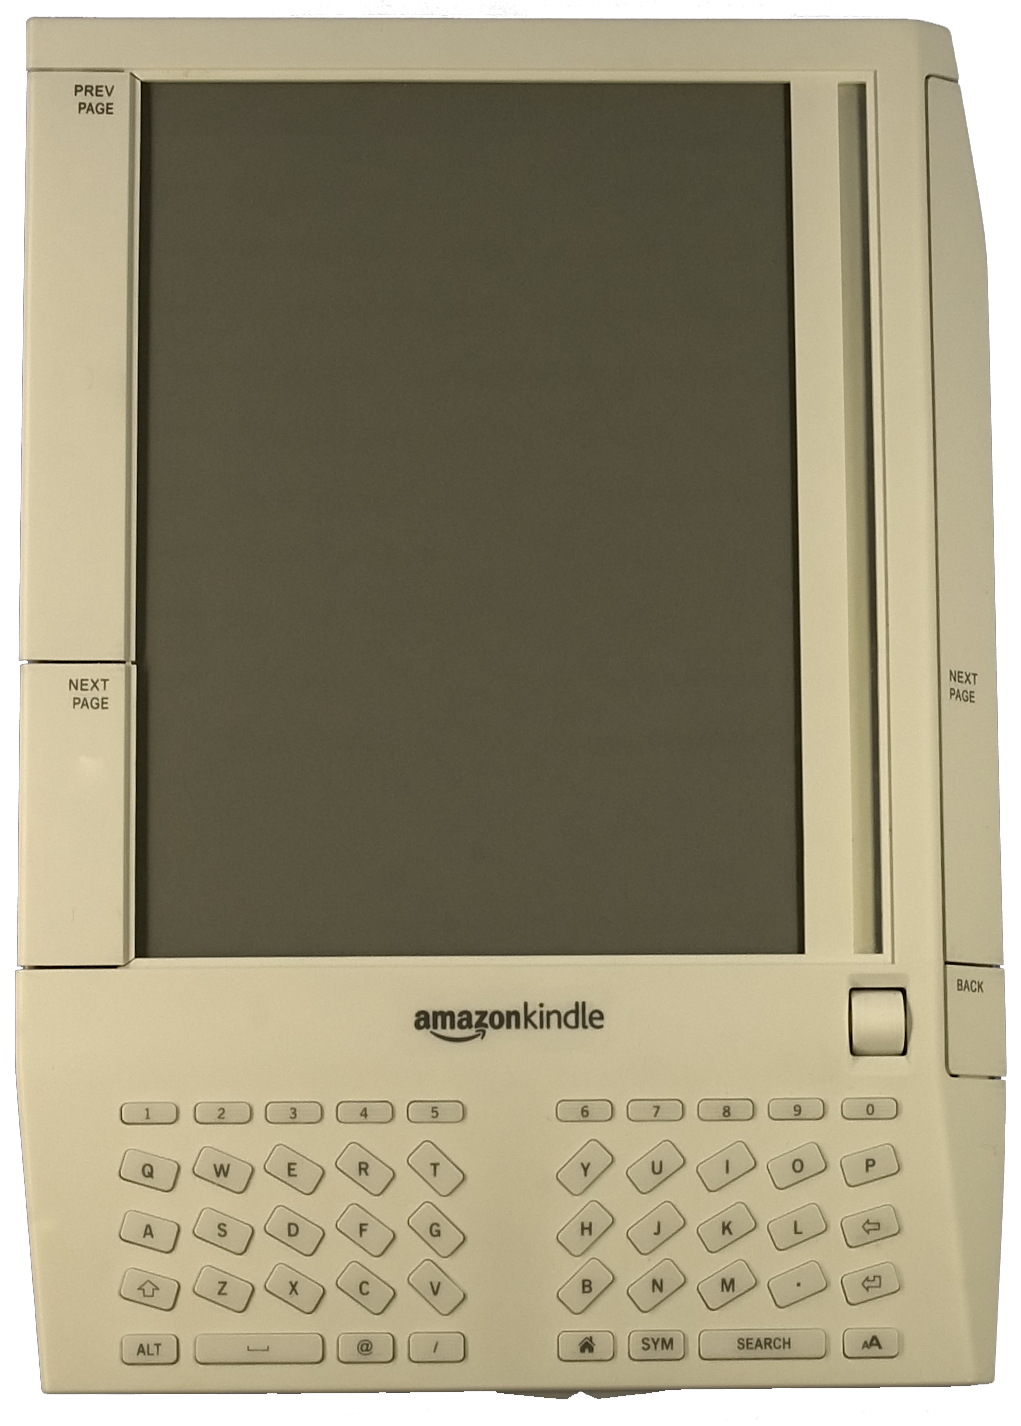 The Kindle - Amazons e-Book reader